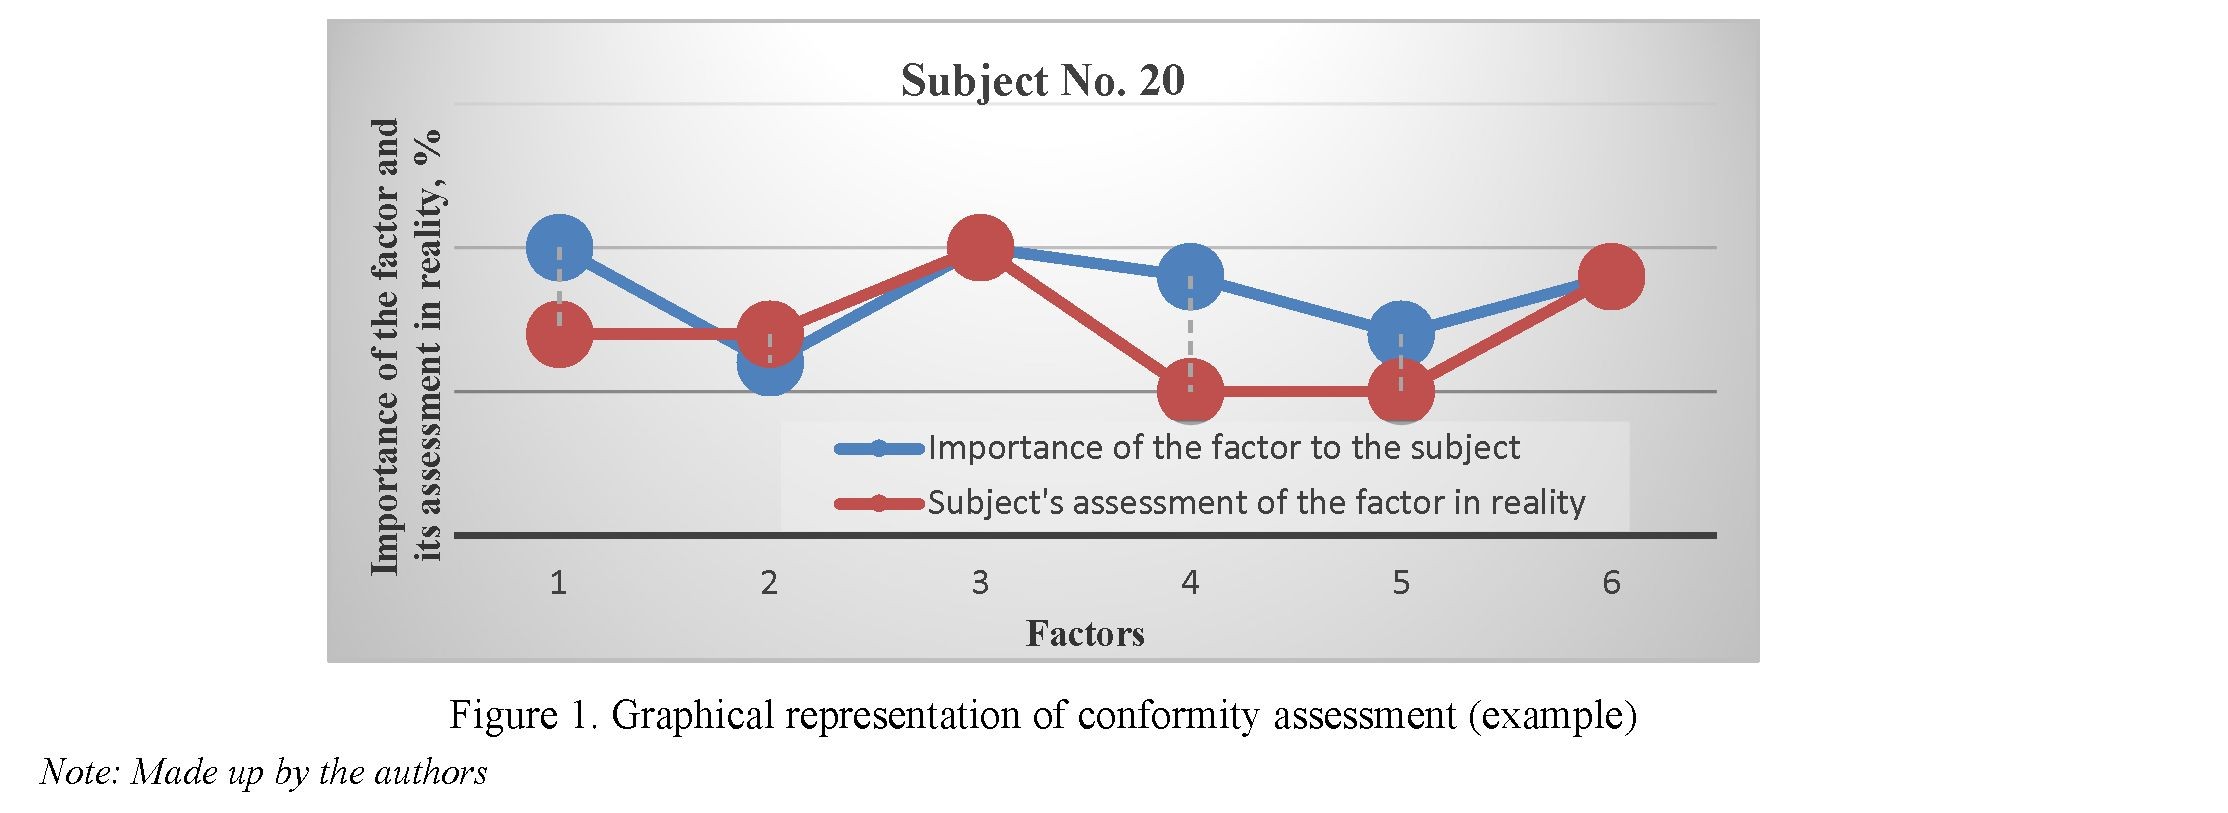 Implementation of a compatibility assessment of the engagement system and the employee motivational profile in company human resources management